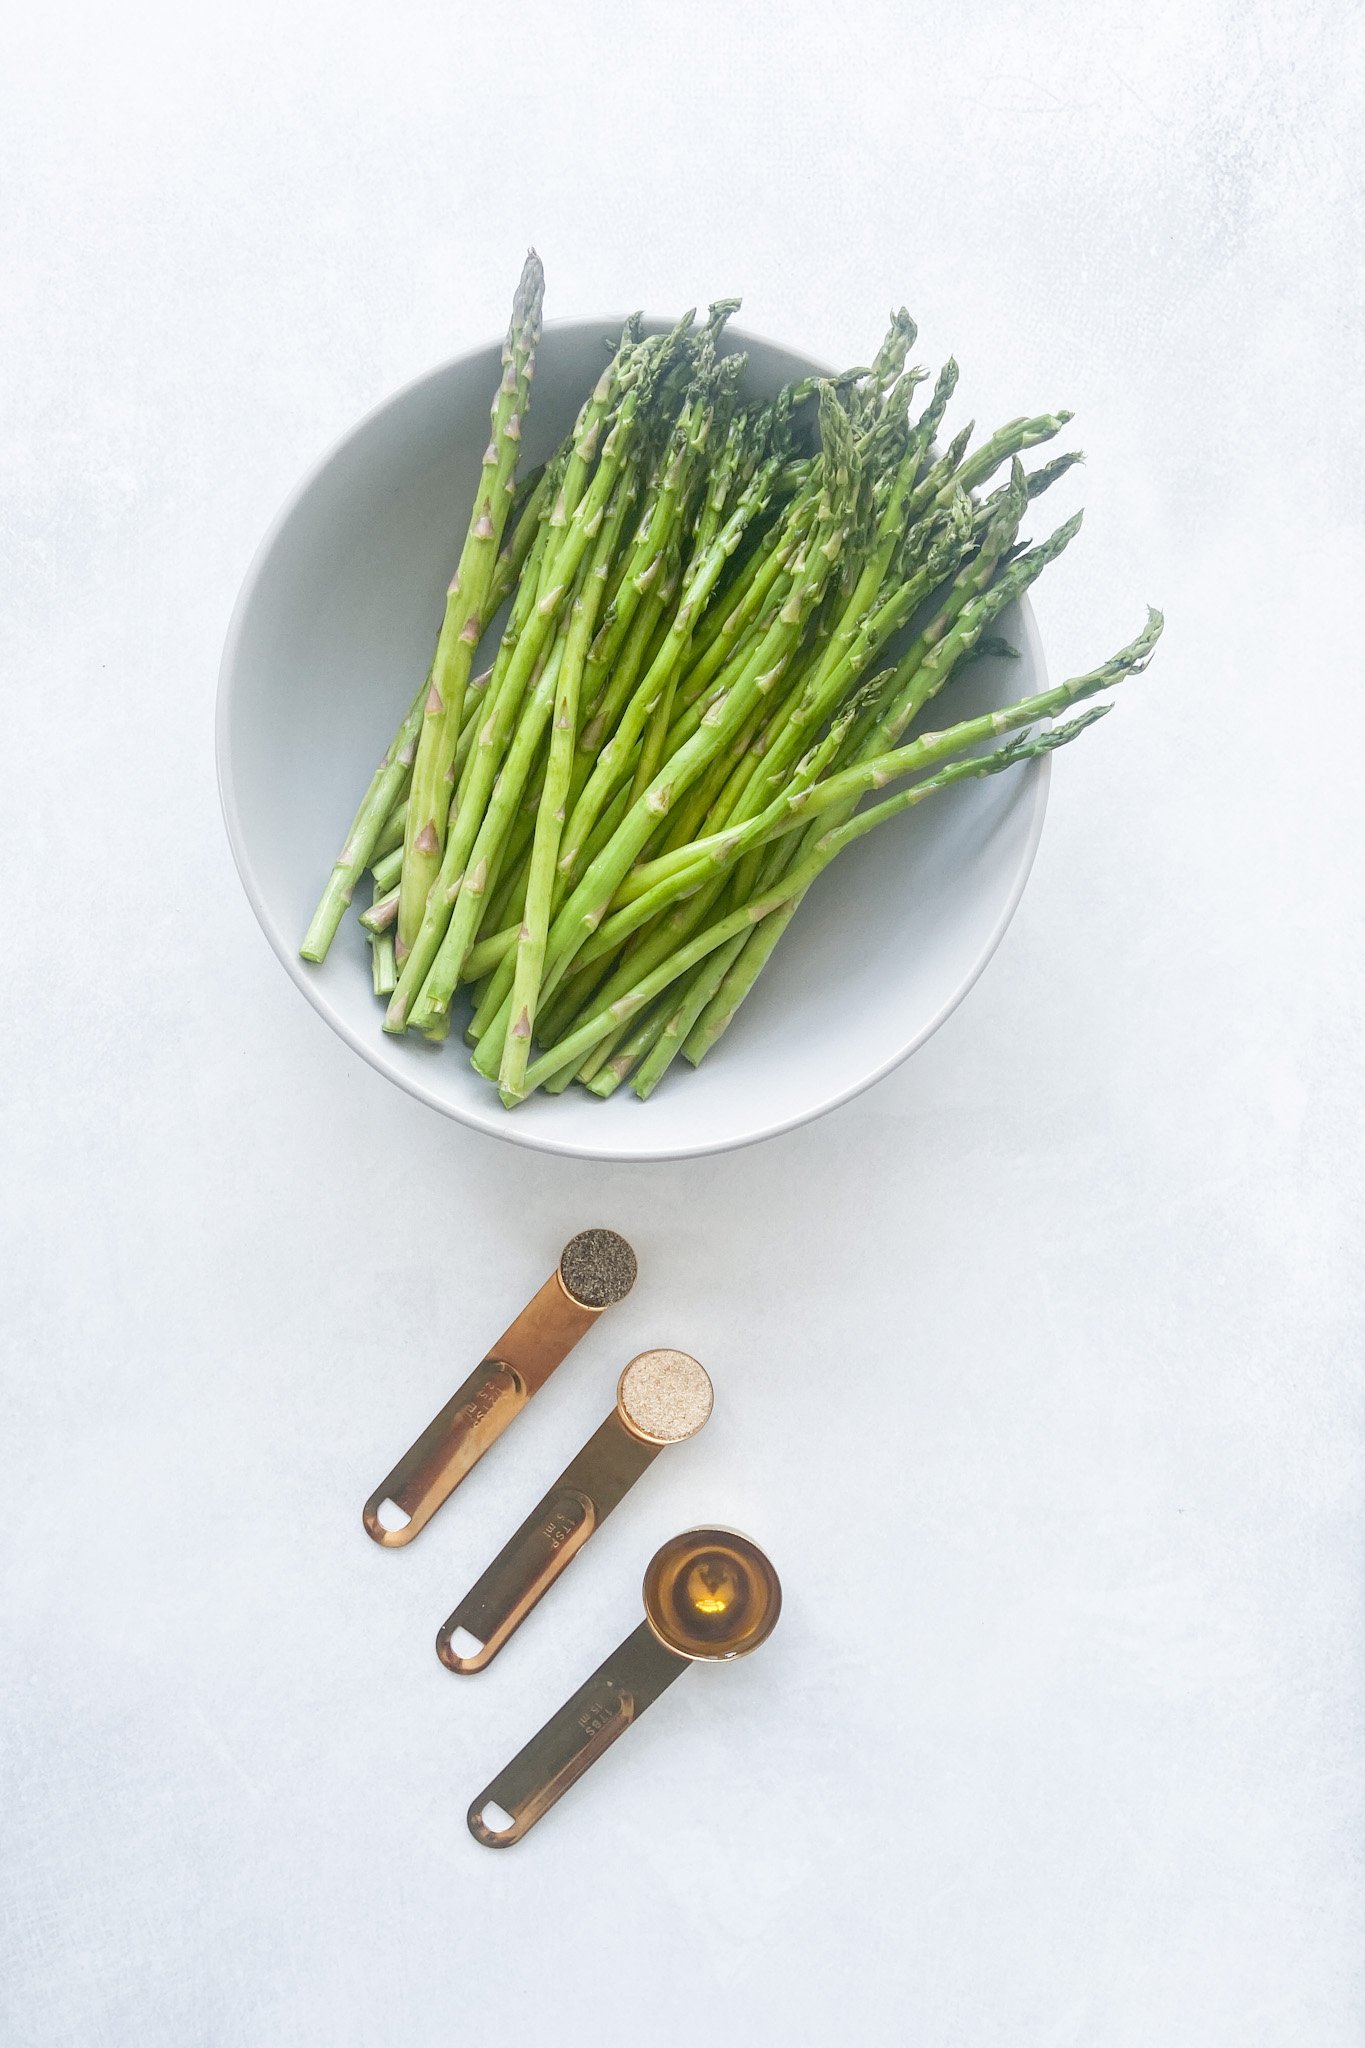 Ingredients to make air fryer asparagus. See recipe card for detailed ingredient quantities.